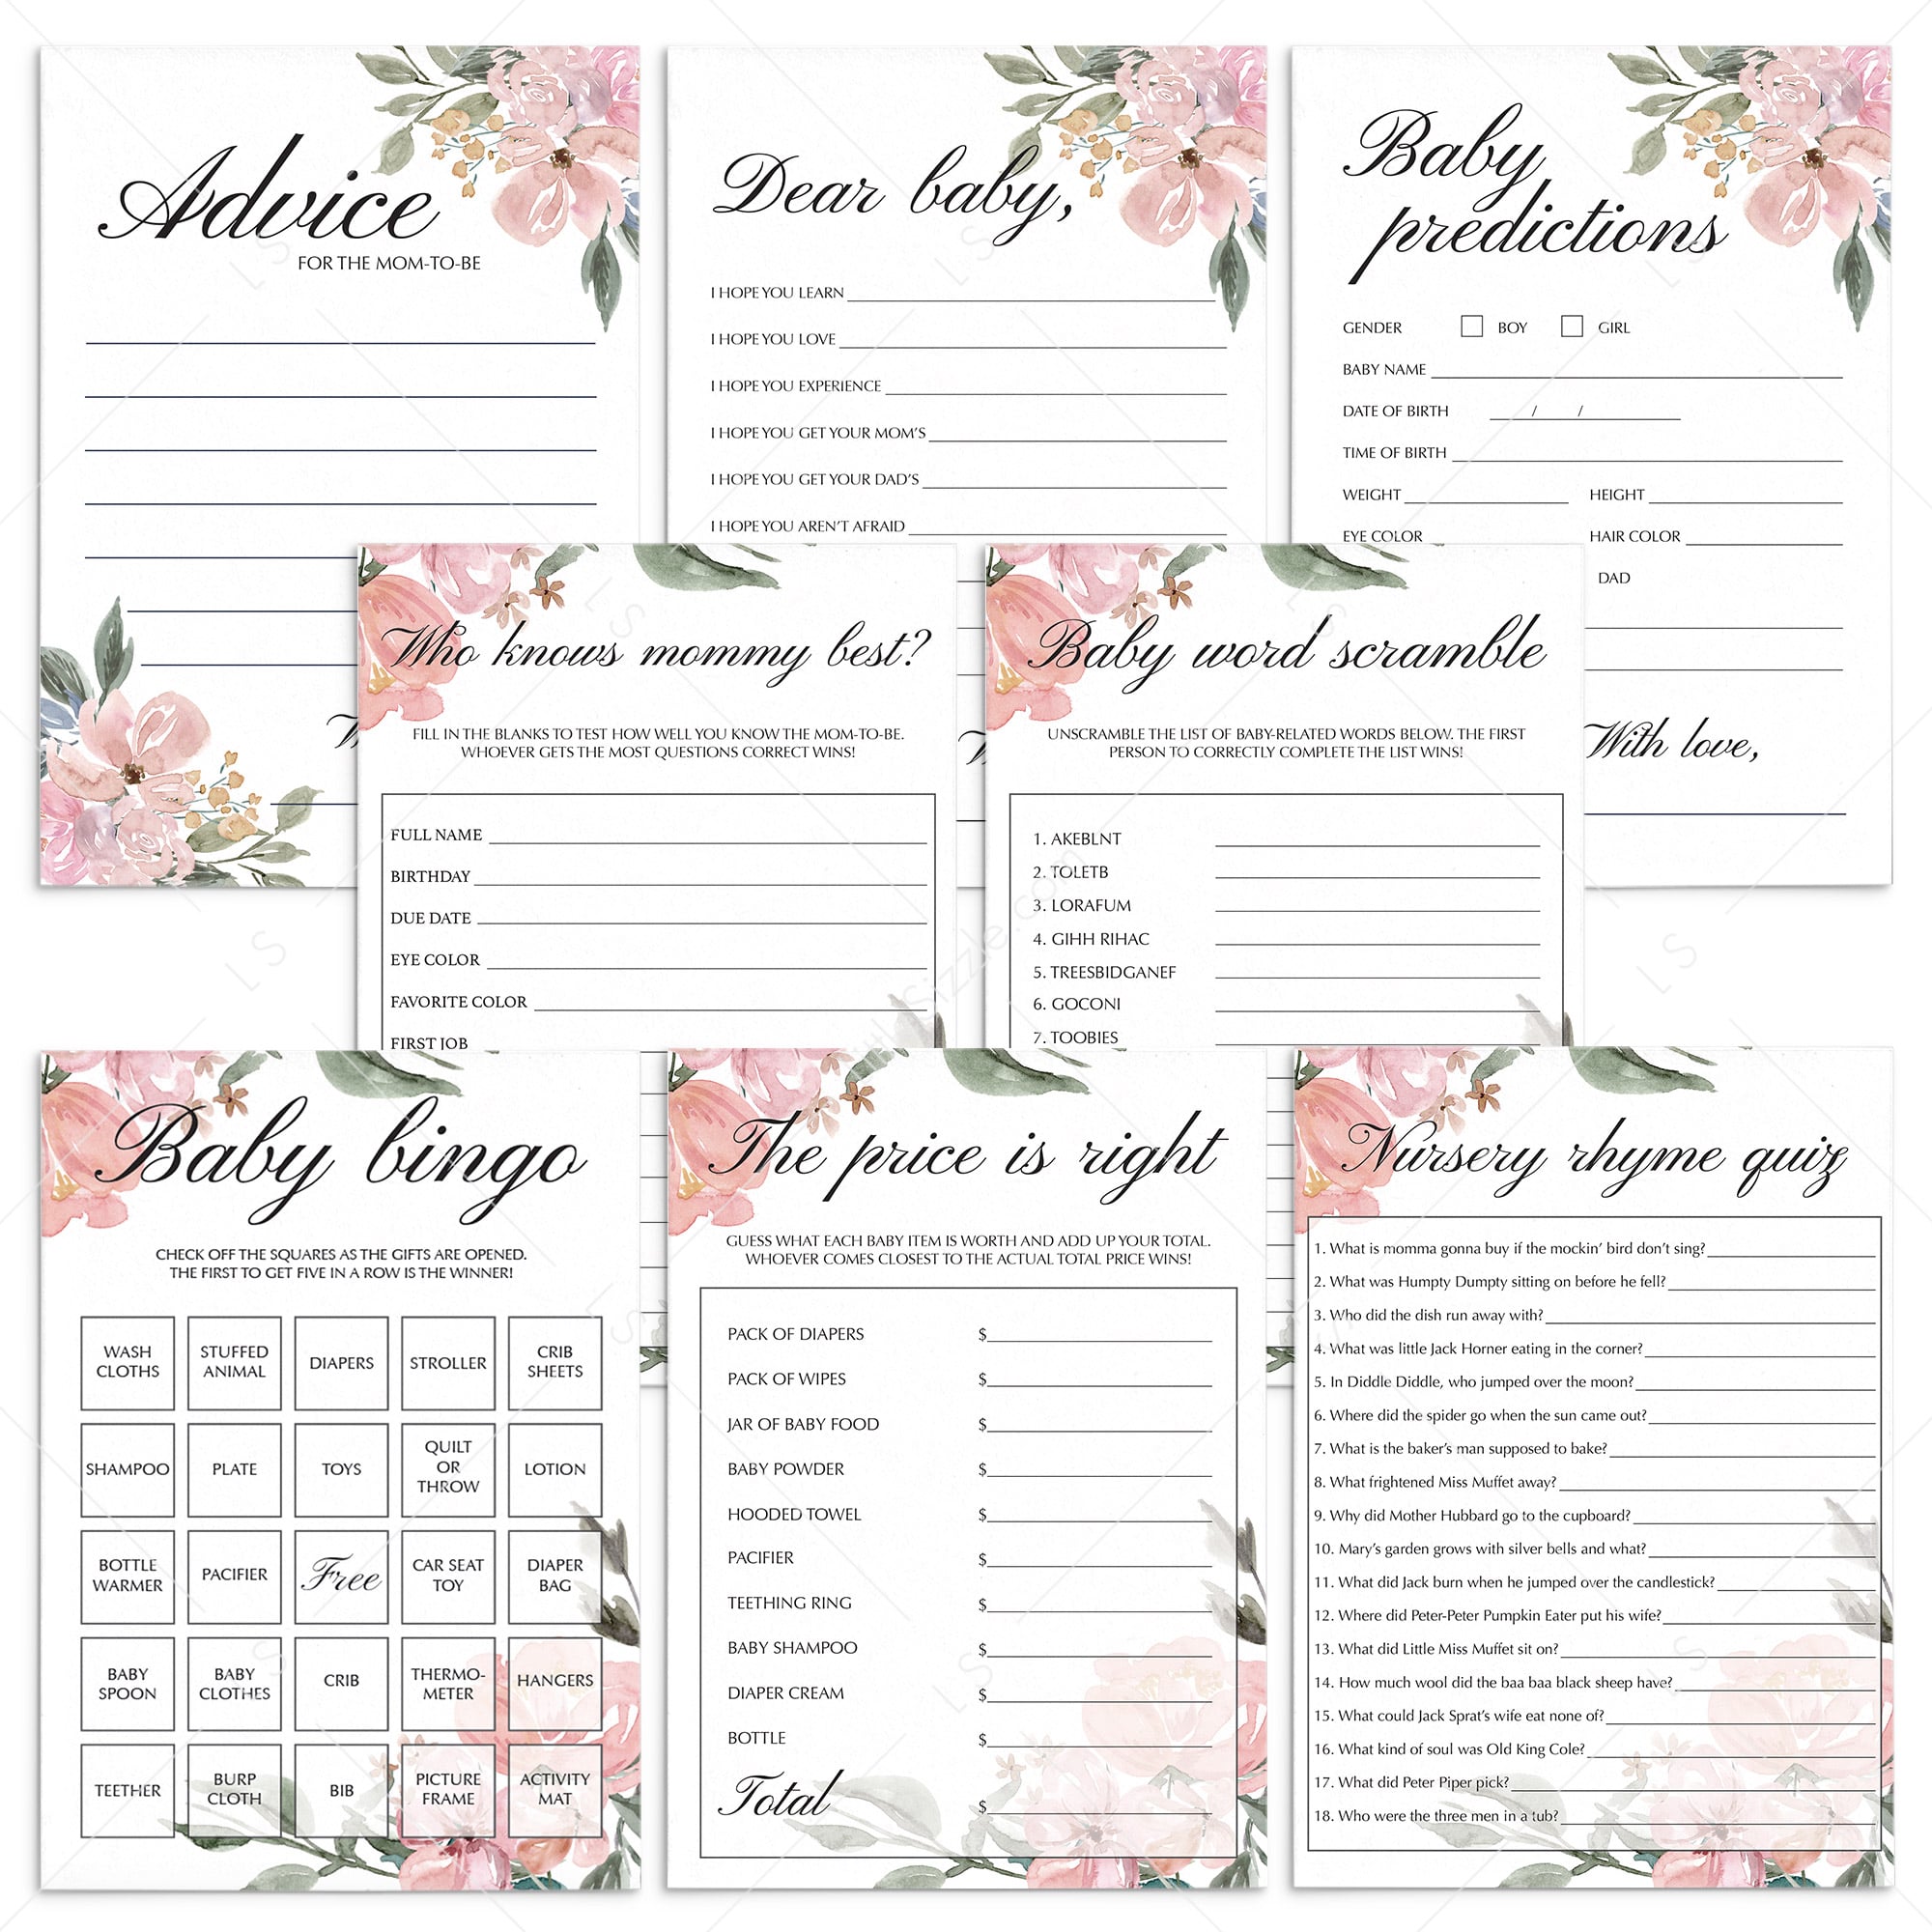 Whimsical baby shower games package printable by LittleSizzle